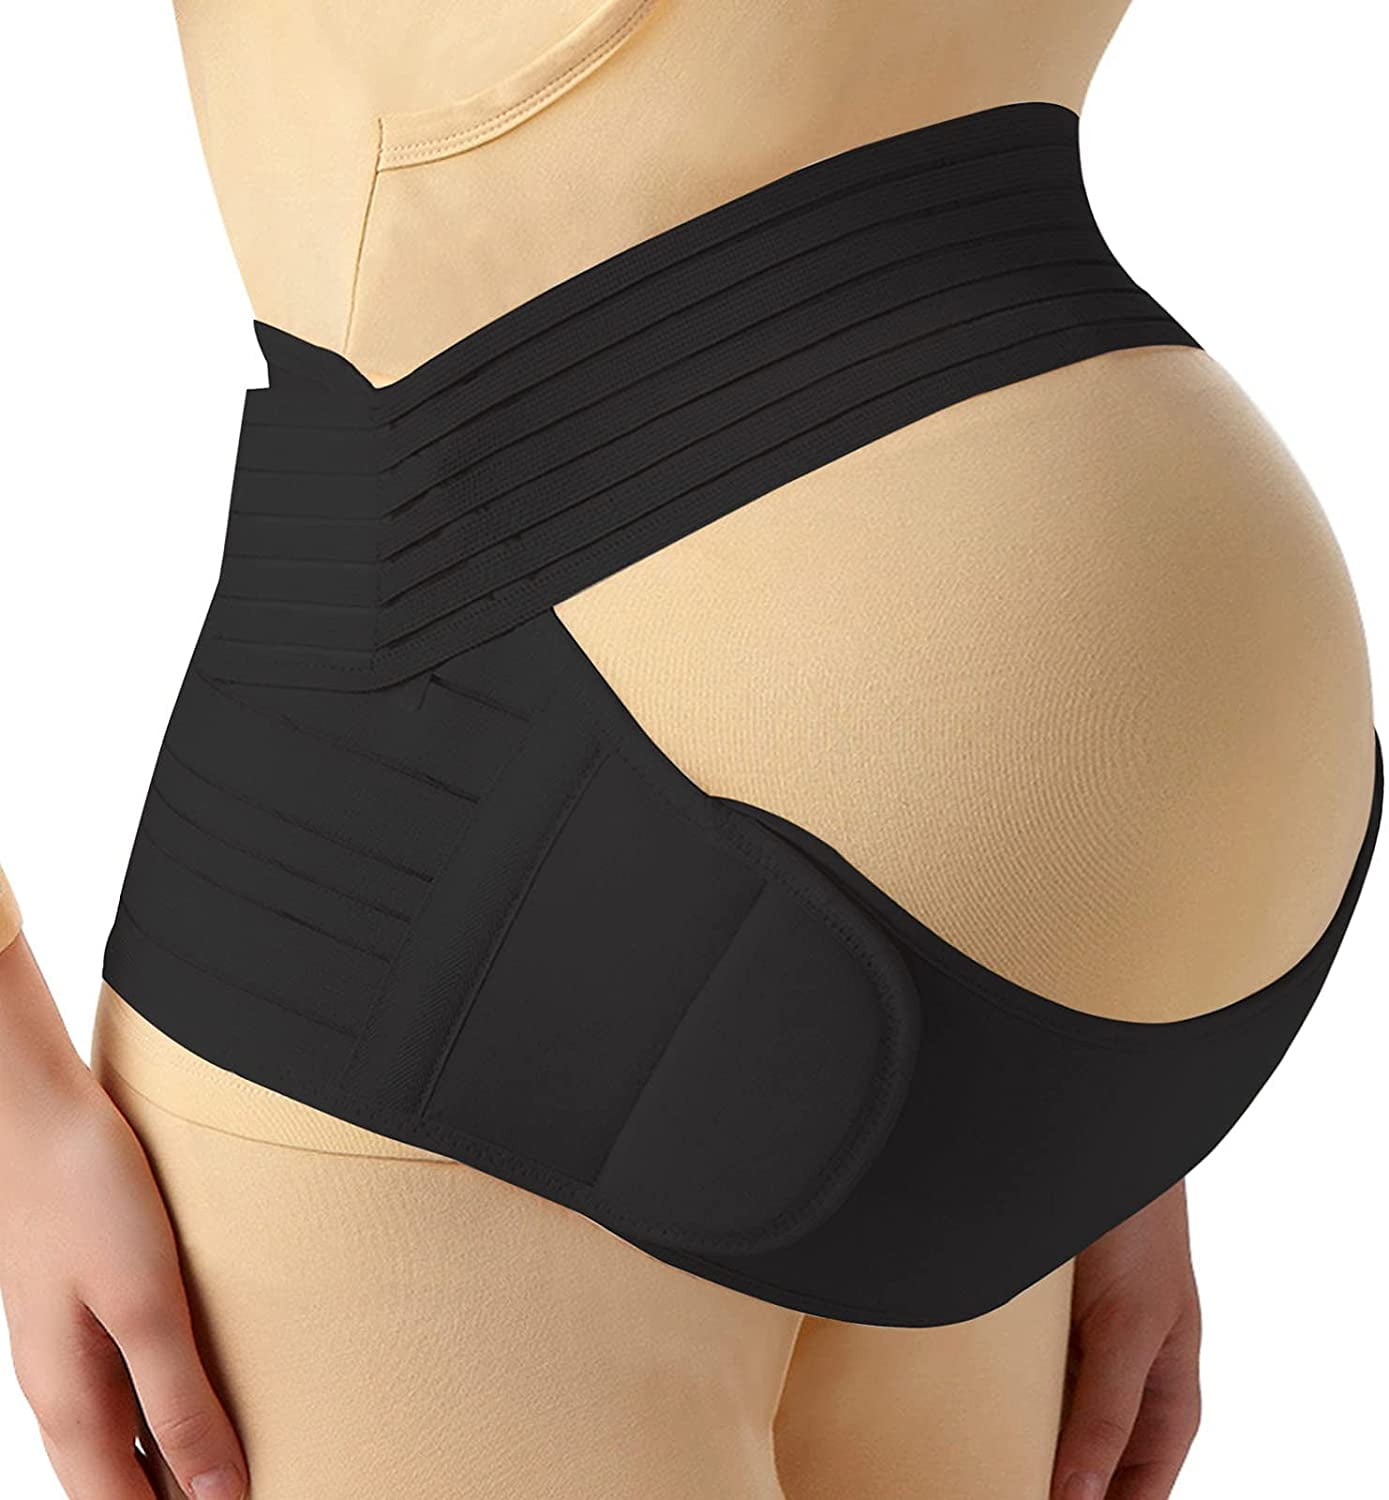 ﻿FlexGuard Pregnancy Belly Support Band - Maternity Belt & Brace for  Pregnant Women, Bump Sling for Pelvic, Abdominal and Lower Back Pain Relief  with